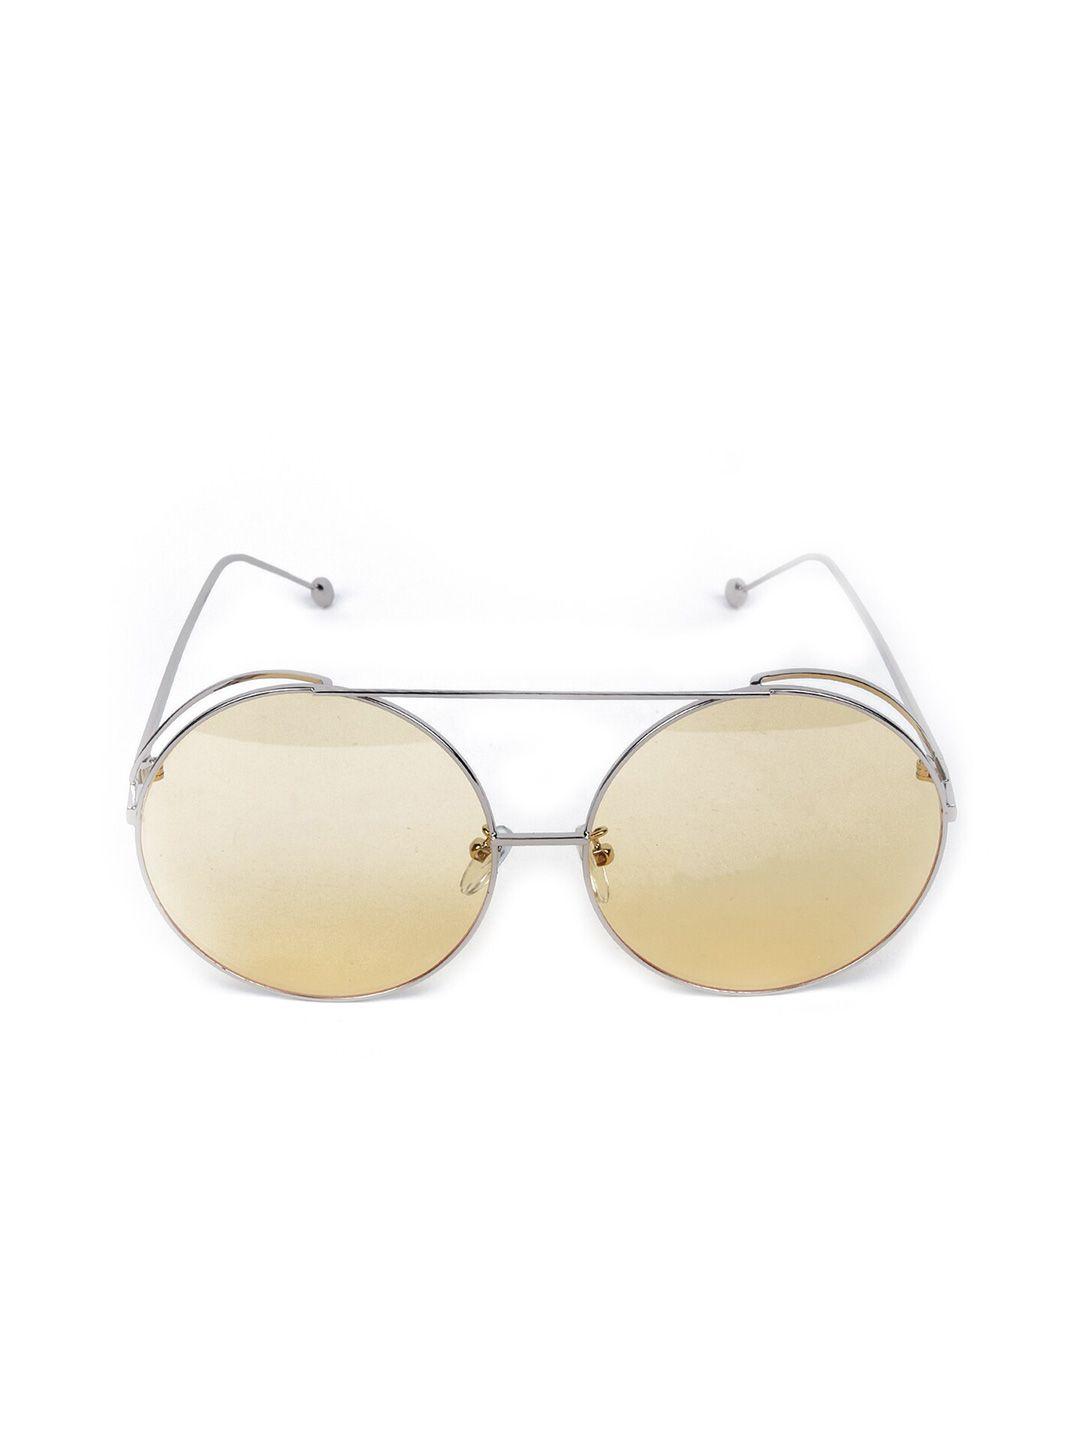 odette-women-yellow-lens-&-silver-toned-round-sunglasses-with-uv-protected-lens-diw241